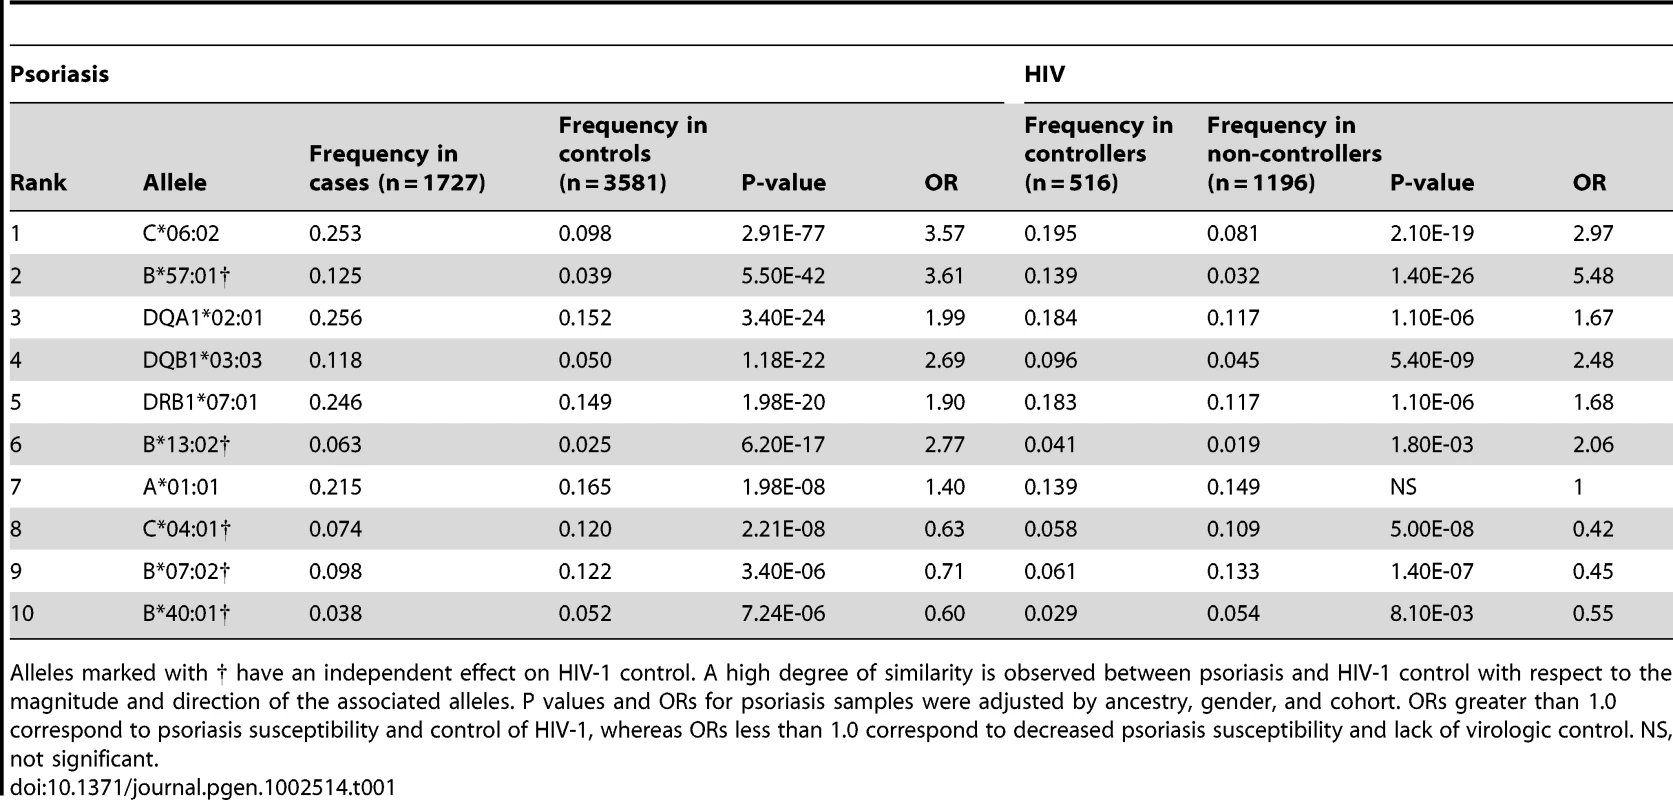 Top ten classical HLA alleles associated with psoriasis, and comparison to HIV-1 controllers as published in <em class=&quot;ref&quot;>[15]</em>.